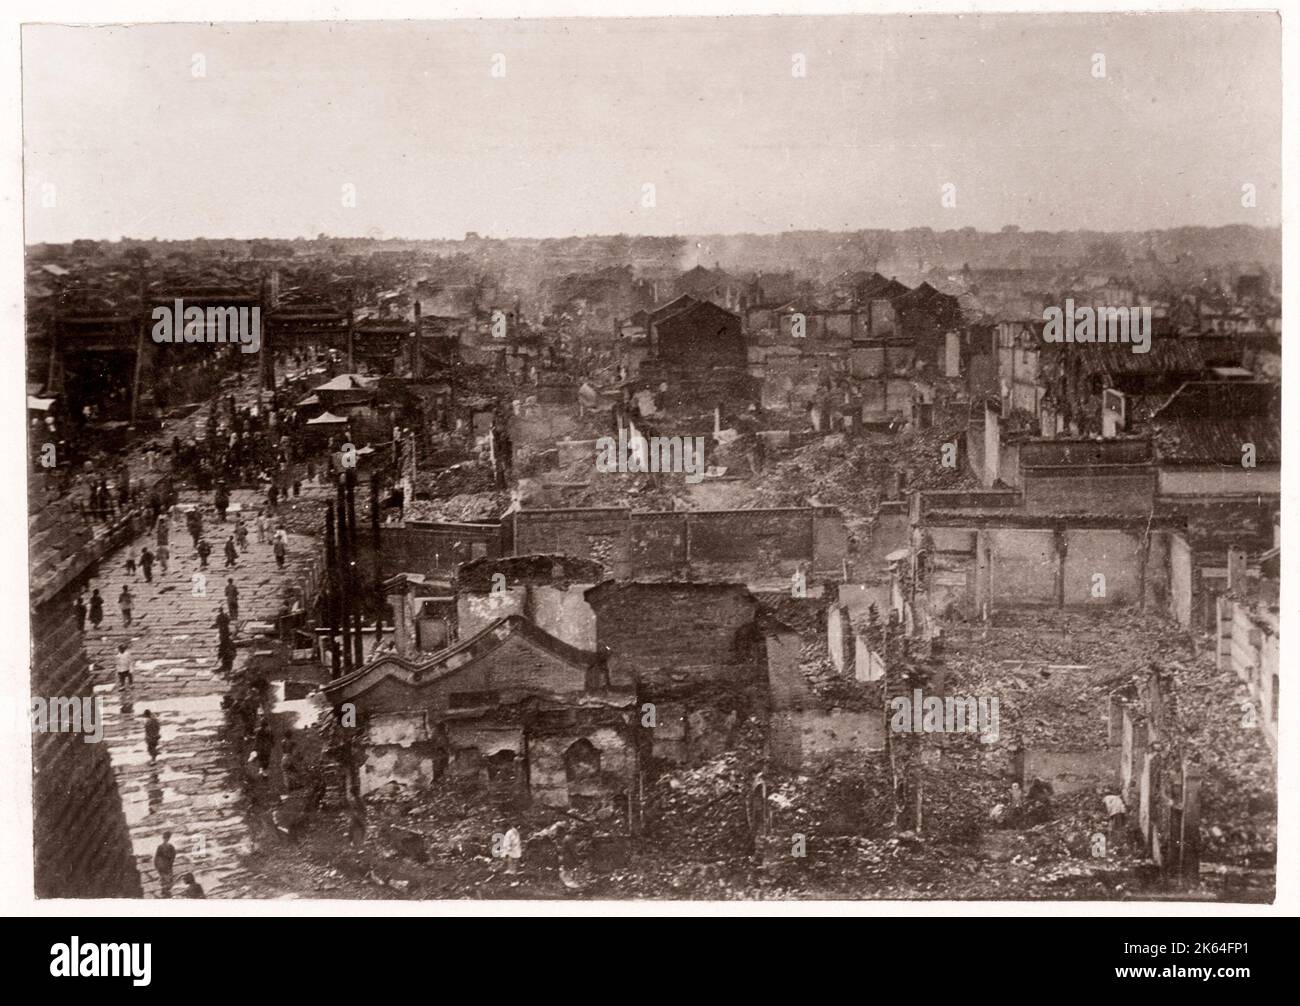 Vintage Photograph China c.1900 - Boxer rebellion or uprising, Yihetuan Movement - image from an album of a British soldier who took part of the supression of the uprising - ruins in Peking Beijing Stock Photo